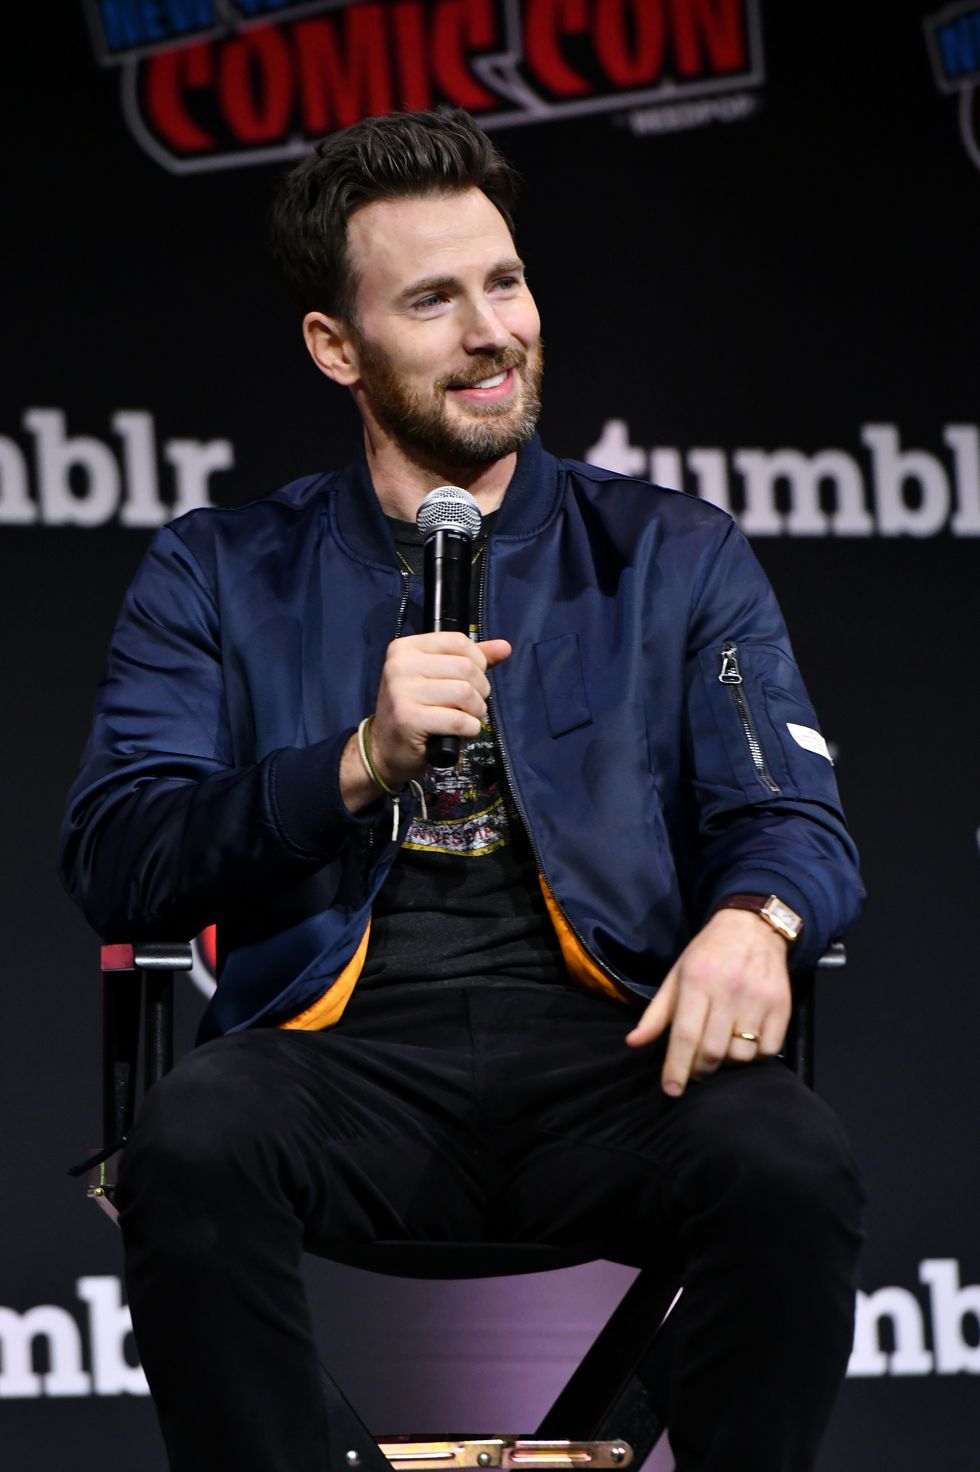 chris-evans-speaks-about-marriage-to-alba-baptista-for-the-first-time